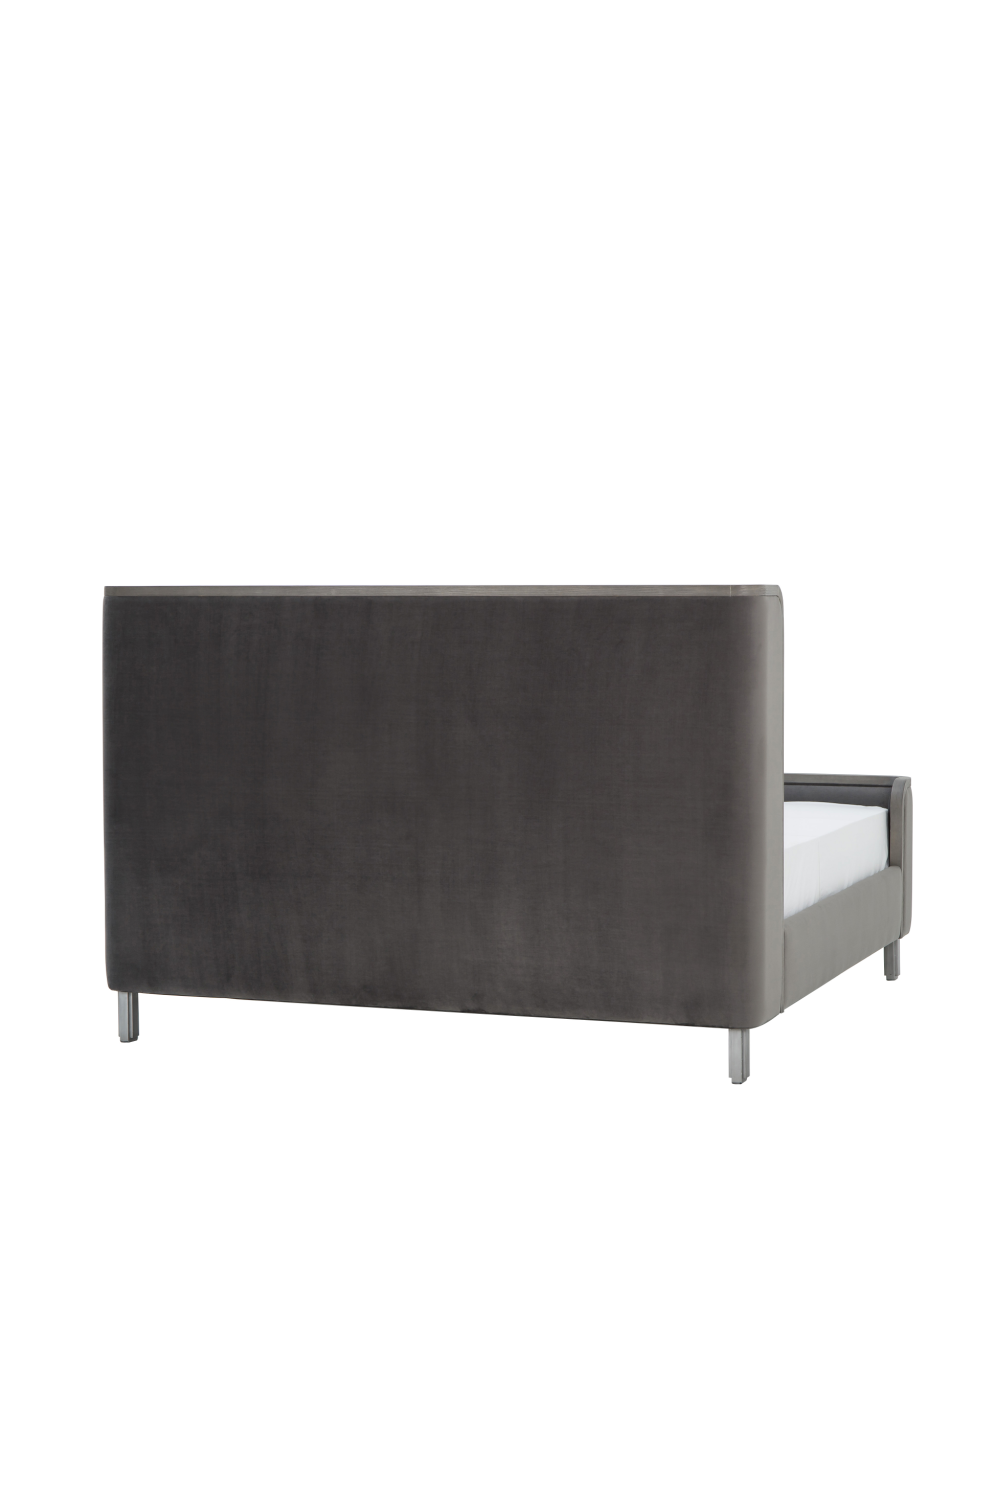 Modern Upholstered Queen Bed | Andrew Martin Ripley | Oroa.com